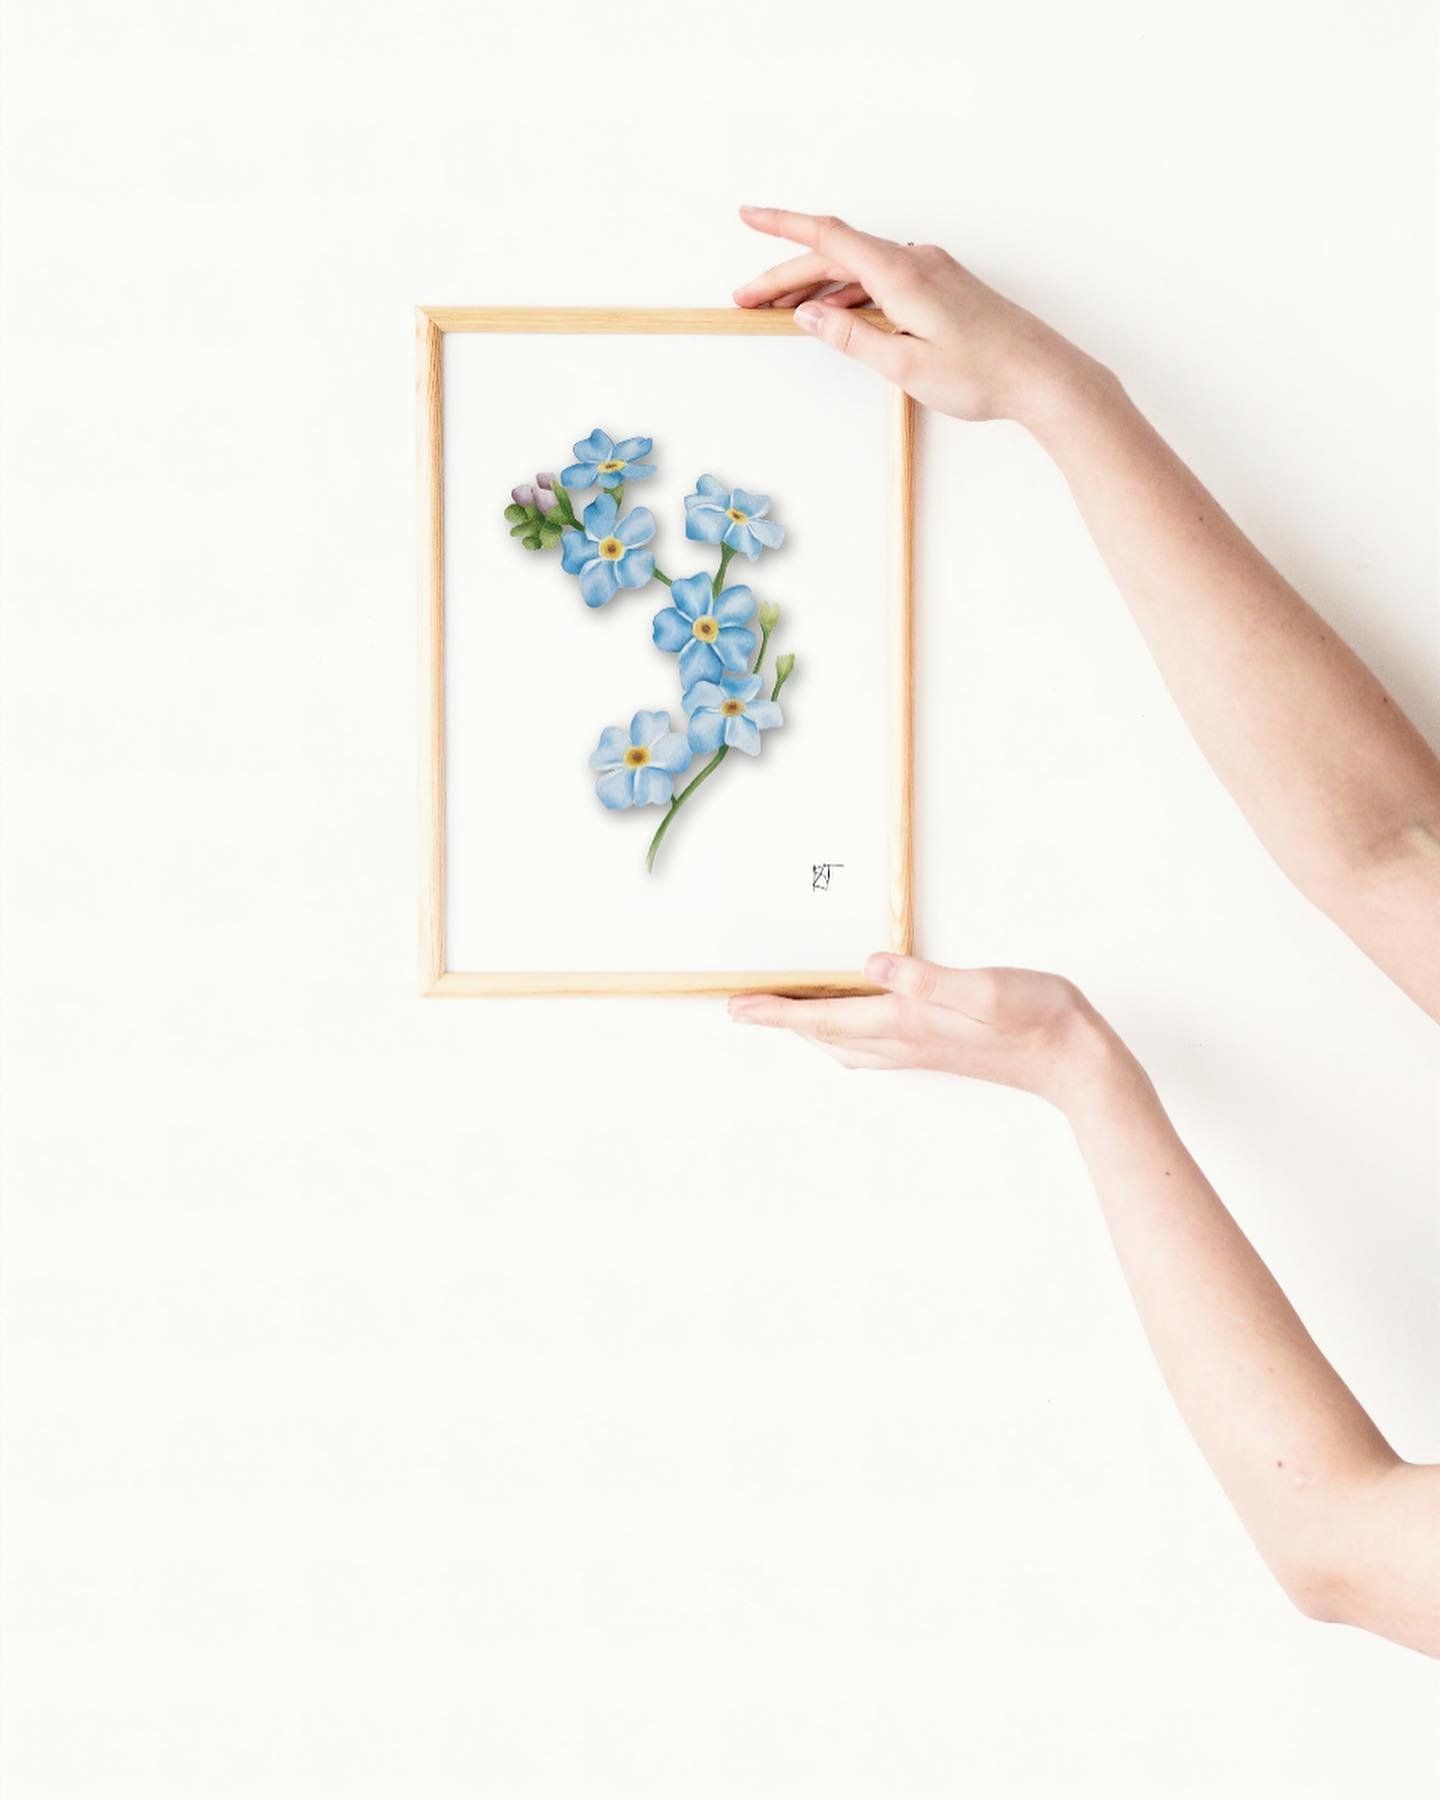 Third flower: Forget-Me-Nots
*
Today&rsquo;s the day! Some important things I want to mention about this website drop&hellip;
✨The three featured flowers will all be found on @savkaclay website, we wanted to make shopping easy for you and do one stop